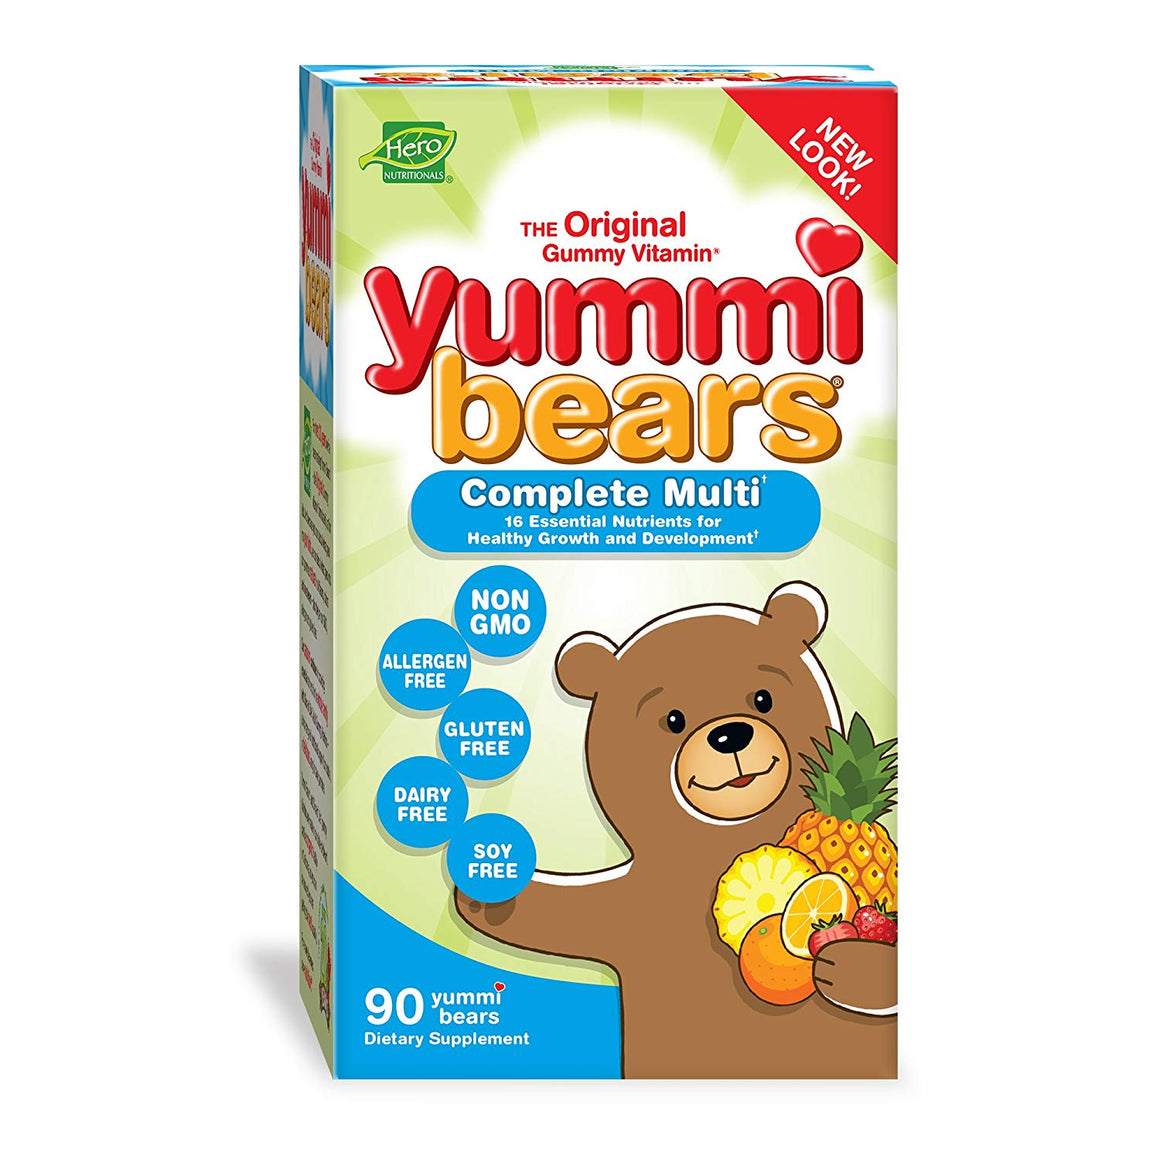 A package of Hero Nutritionals Yummi Bears Complete Multi